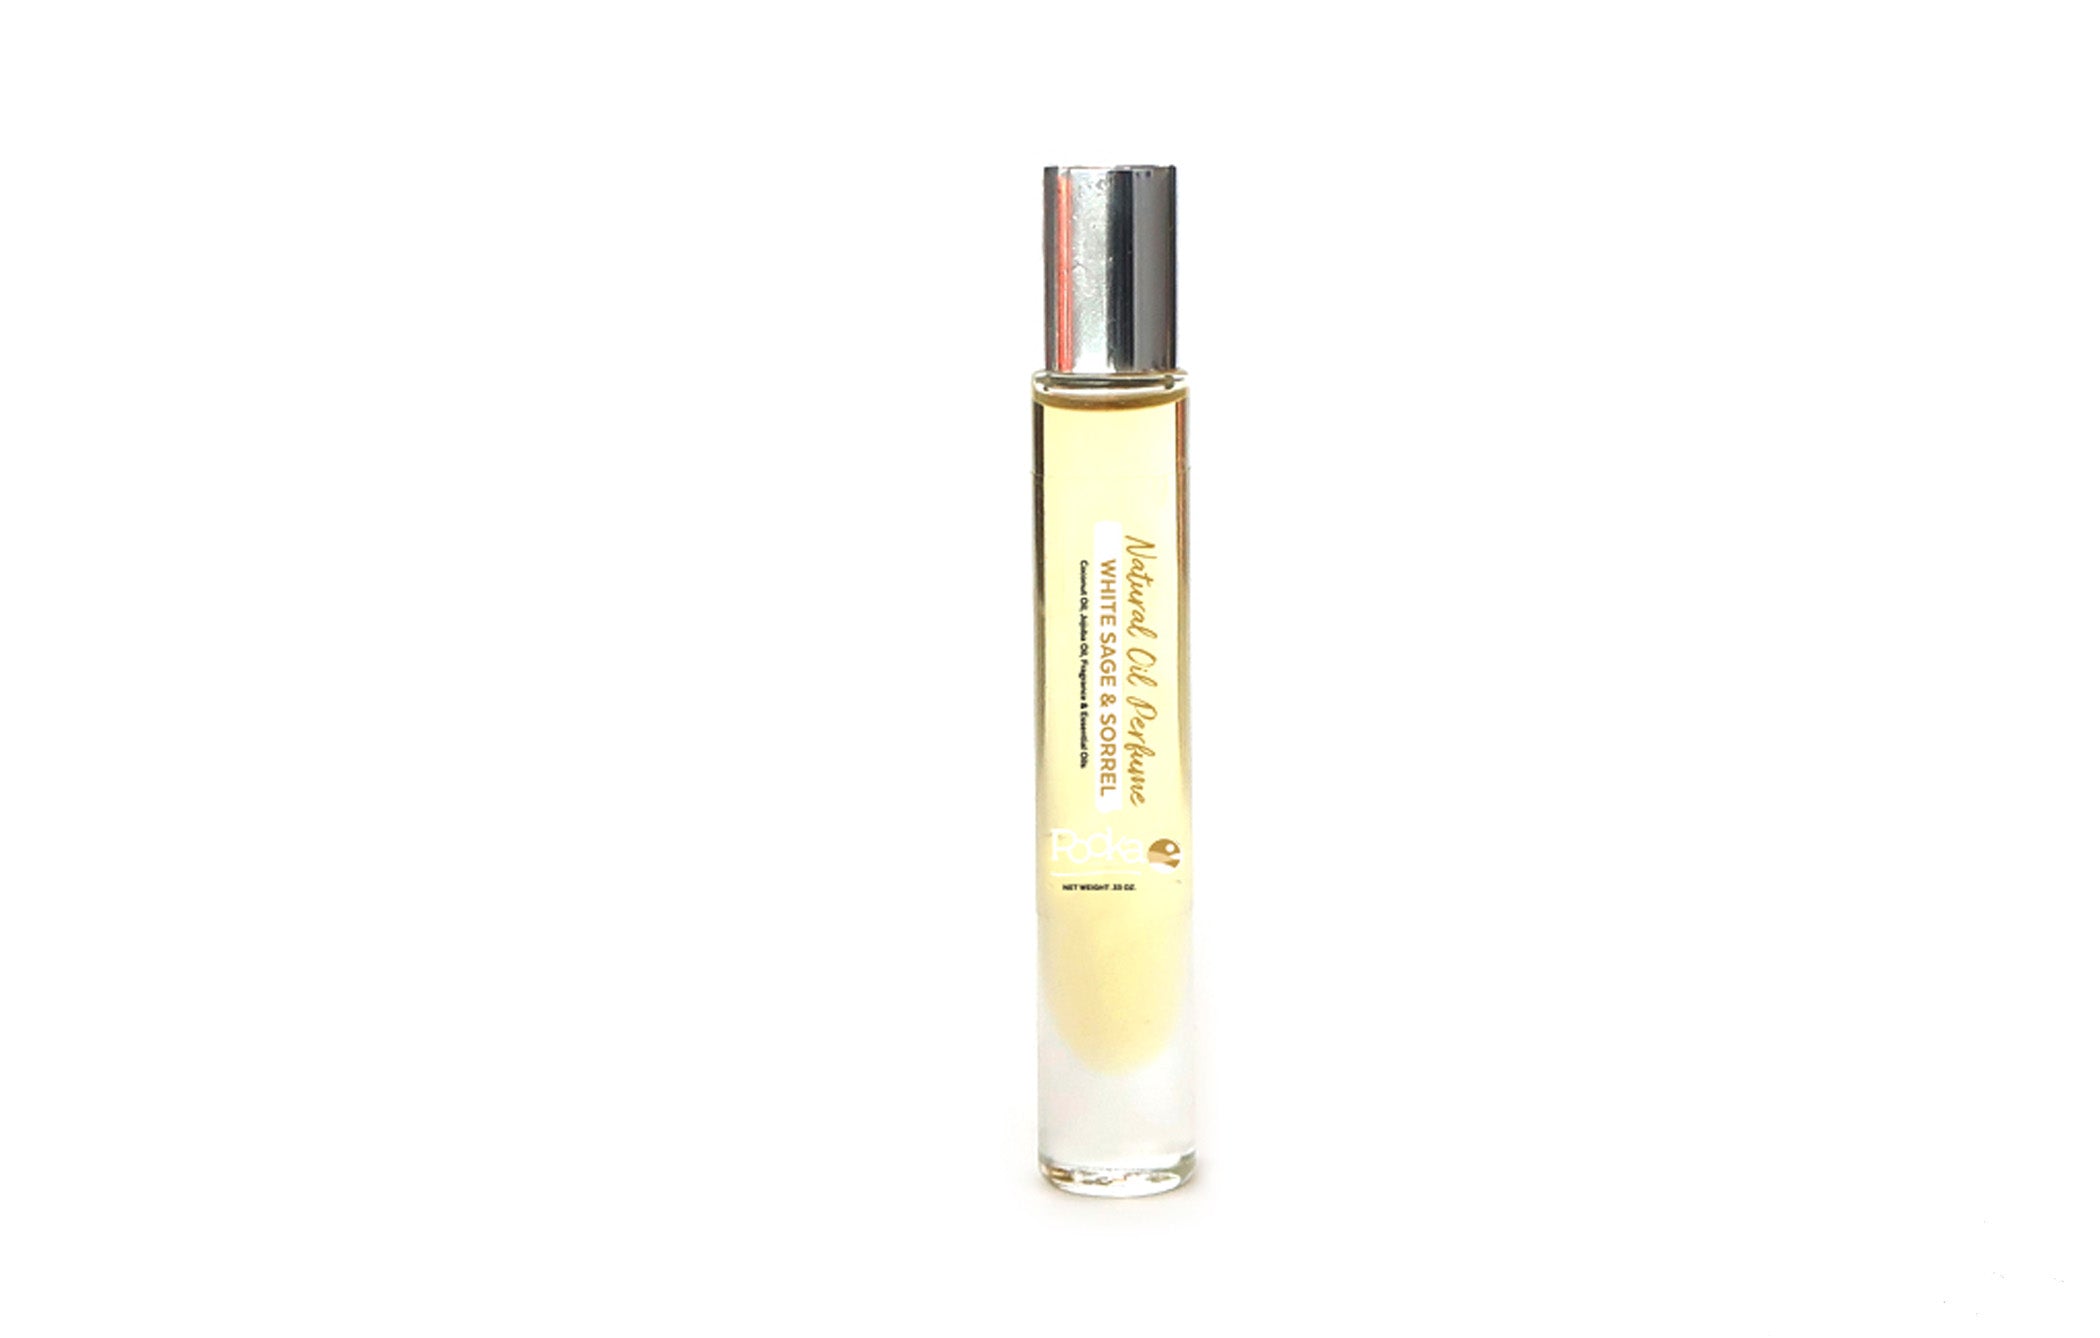 Sage Perfume Oil Concentrate Sample by Sage